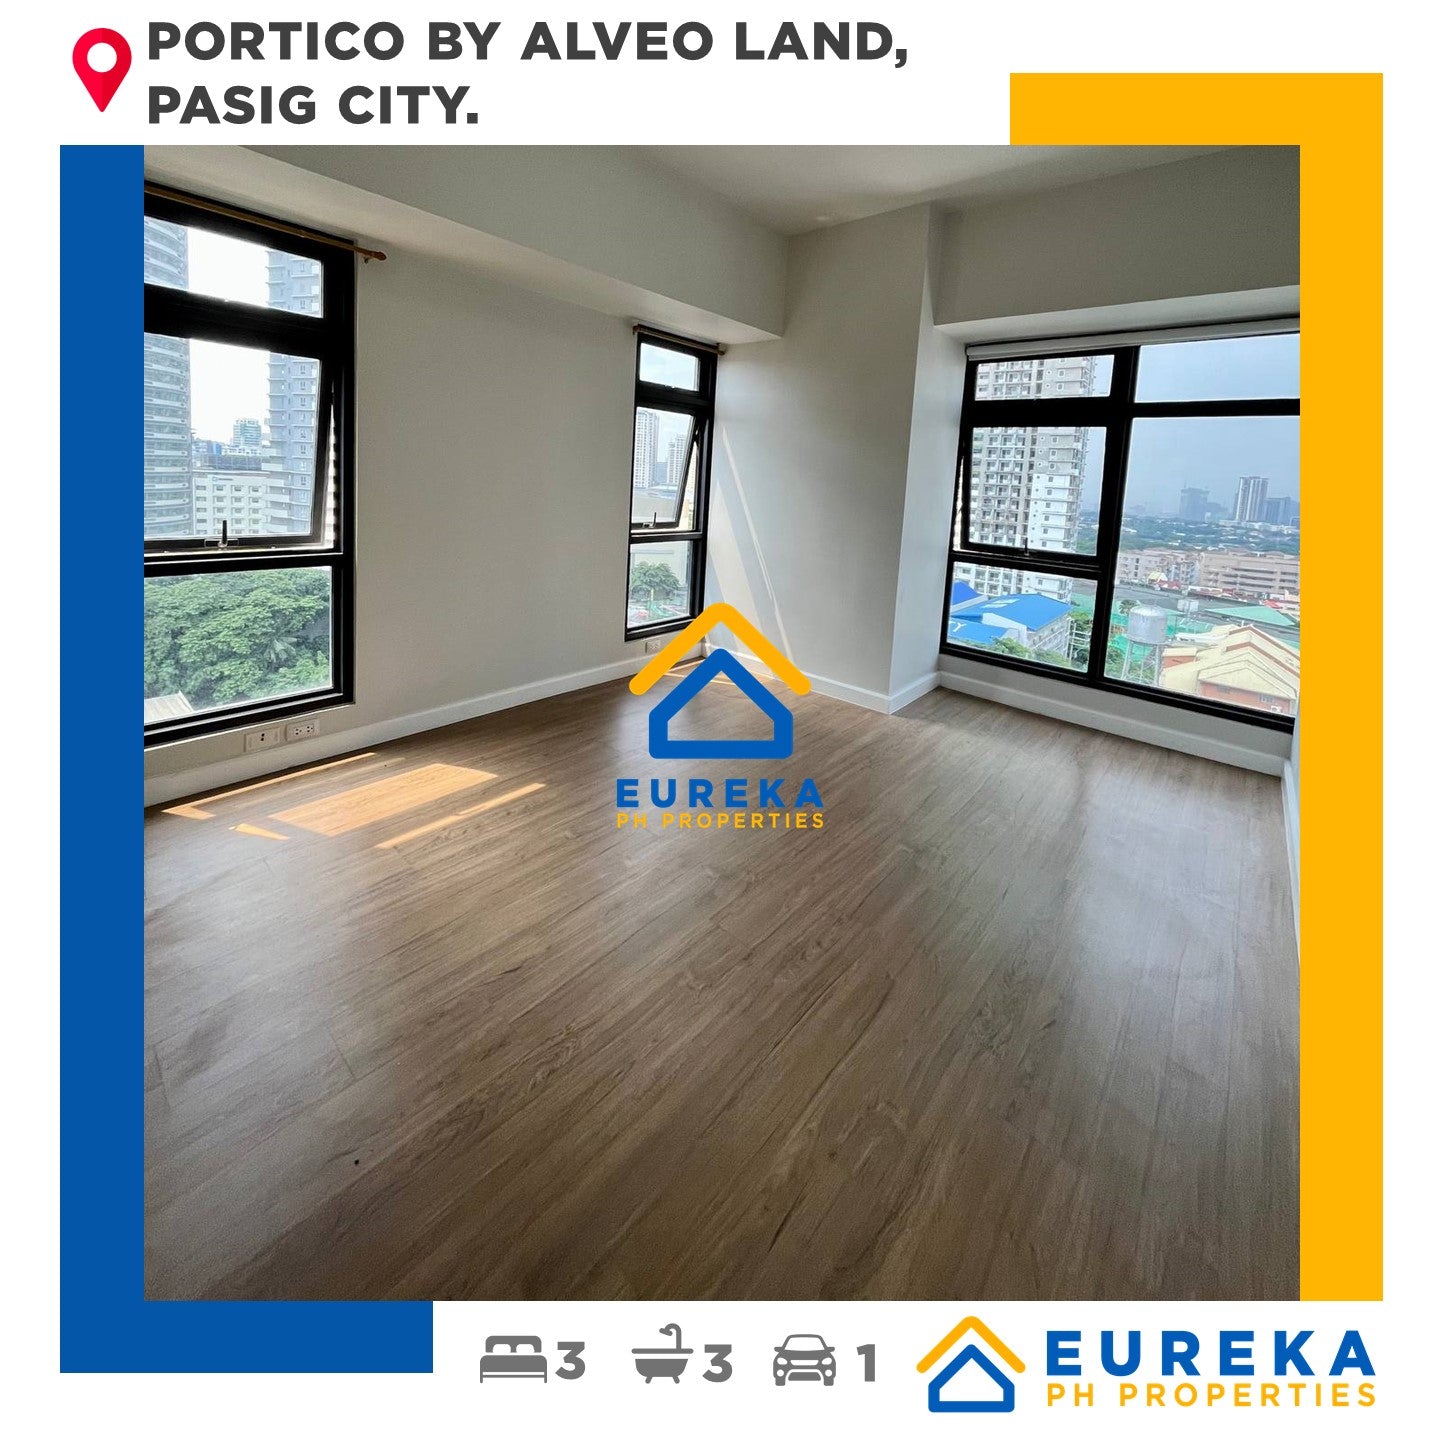 Brand new 86 sqm 2BR with utility room and  1 parking at Portico by Alveo Land, Pasig City.